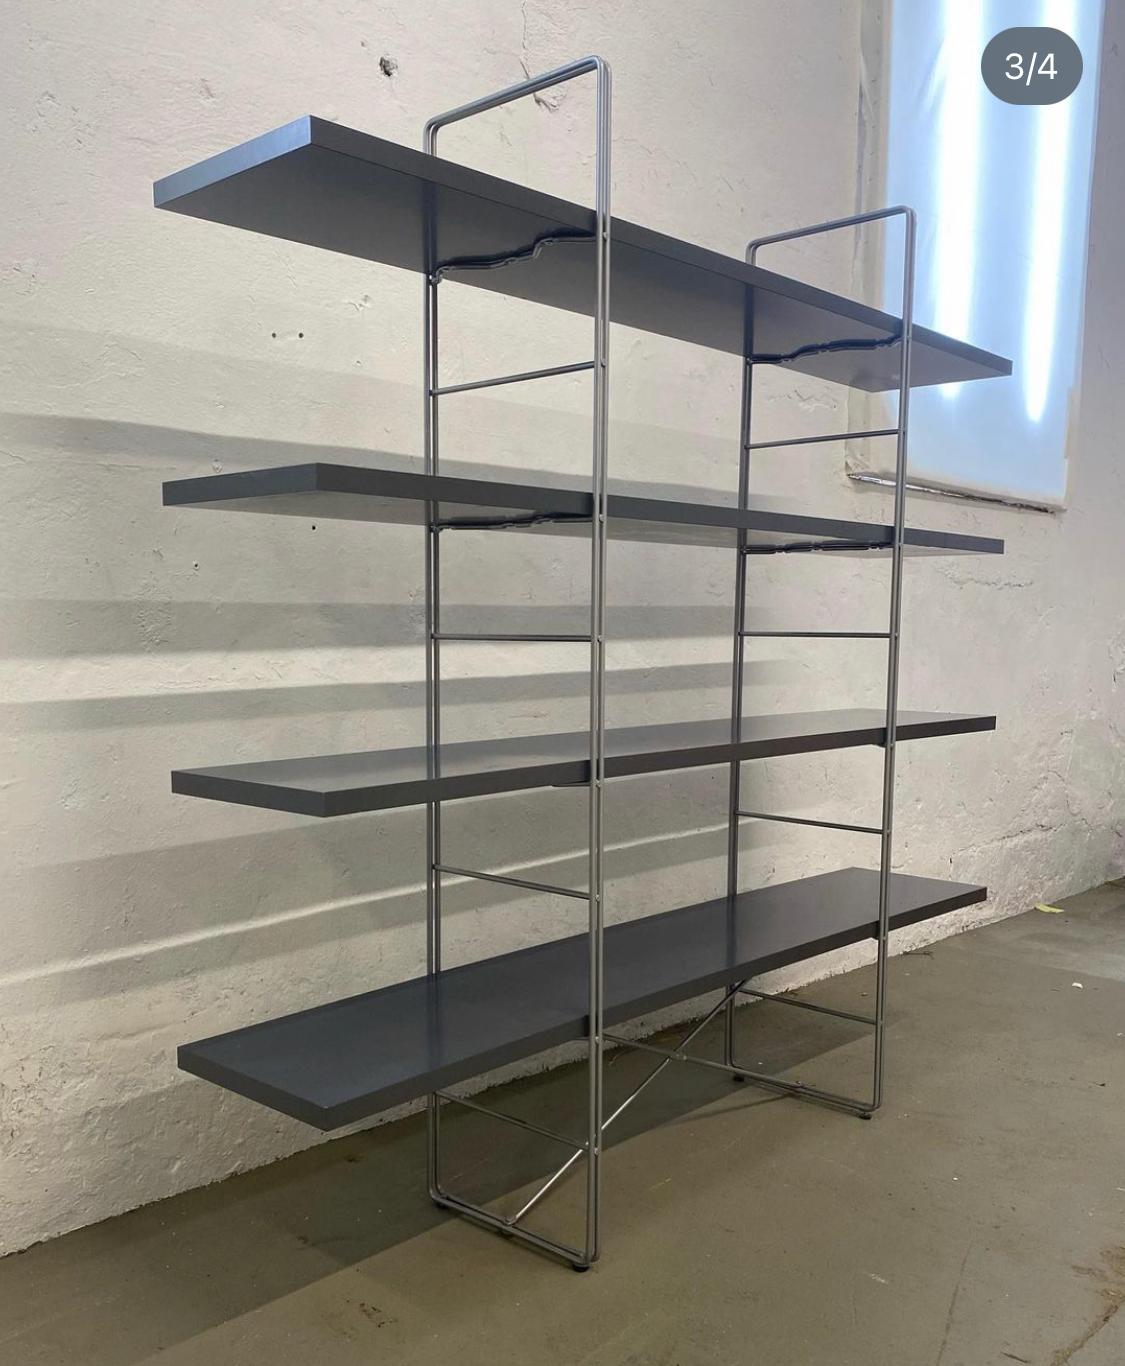 Designed 1985 by Niels Gammelgaard for Ikea, the Enerti guide self features 4 shelves on a steel ladder system.
The shelf is in wonderful vintage condition and is the perfect shelf for any space. 